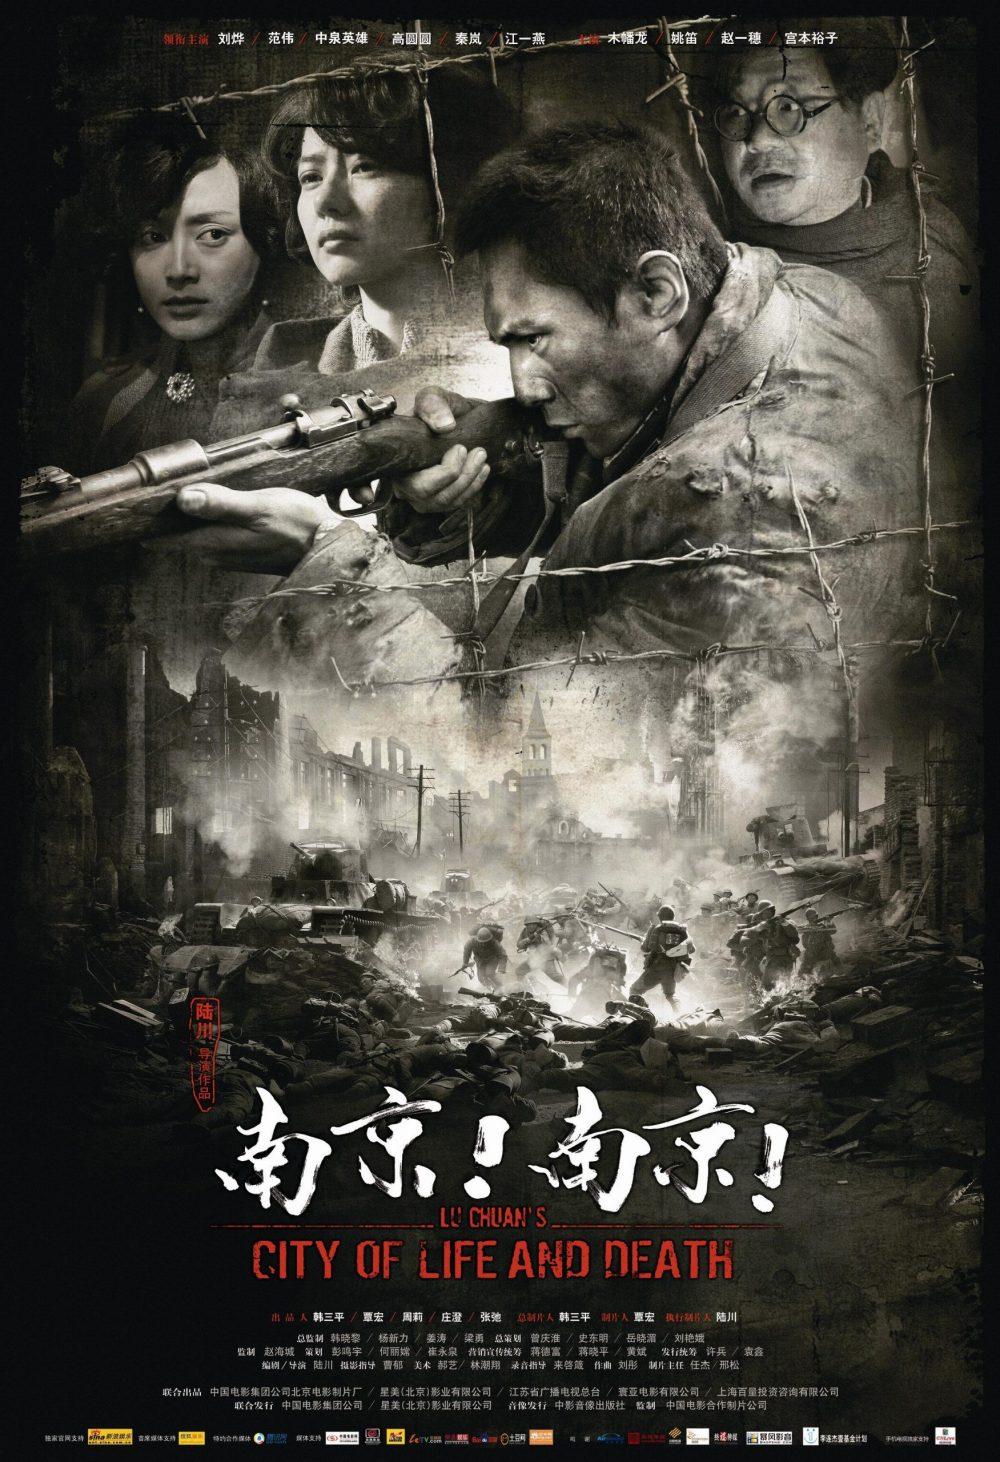 Thảm sát ở Nam Kinh - City of Life and Death (2009)